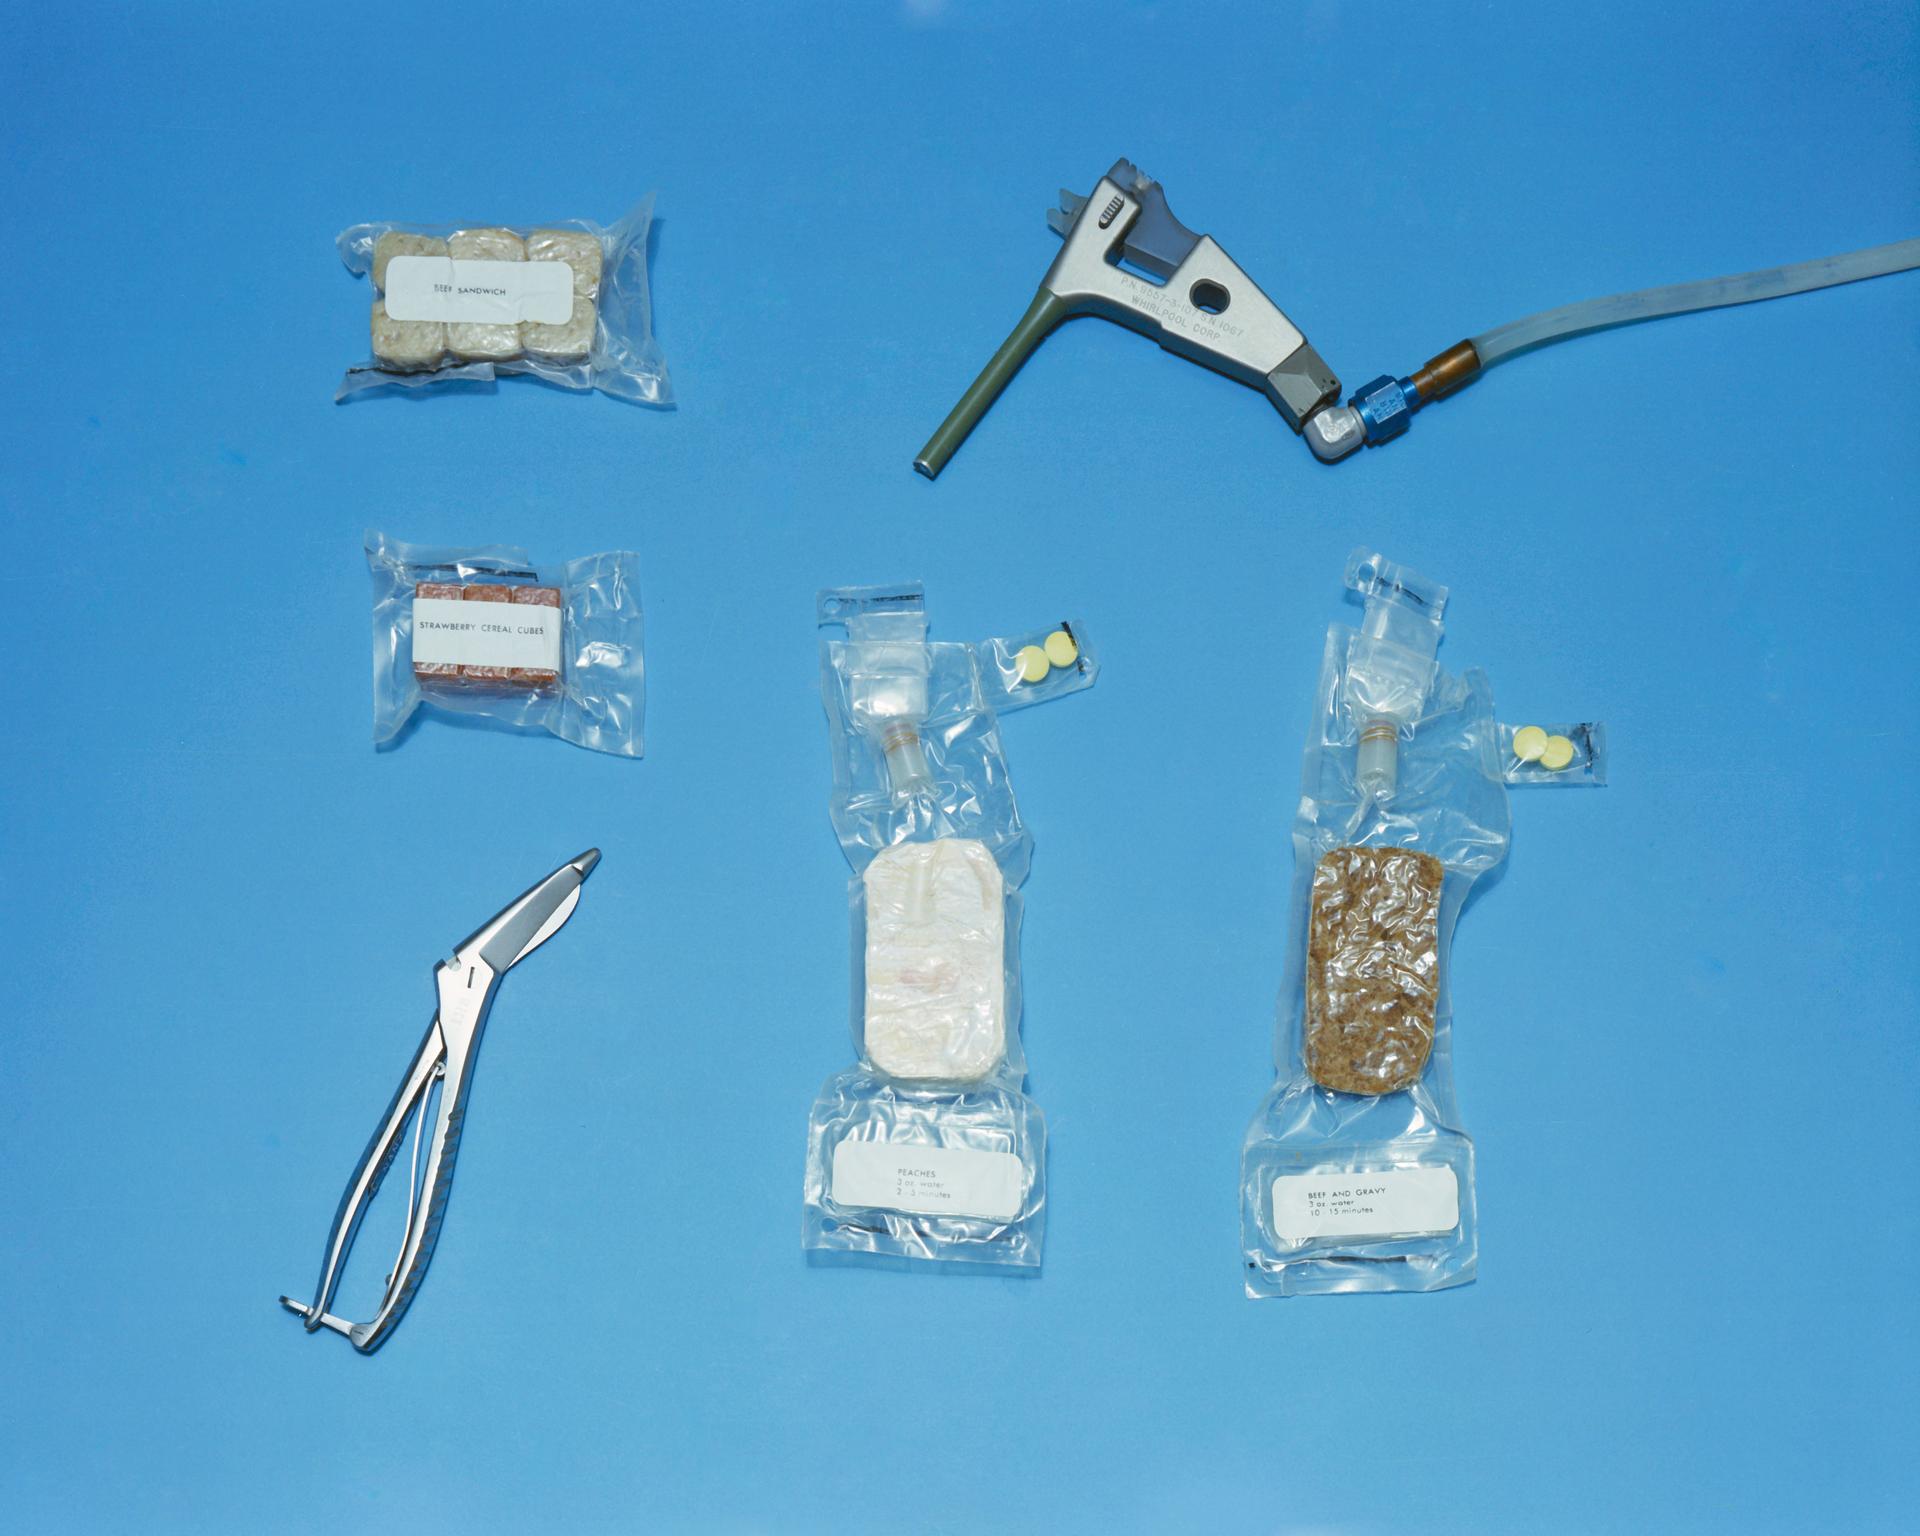 An array of food items and related implements used on the Gemini-Titan 4 mission